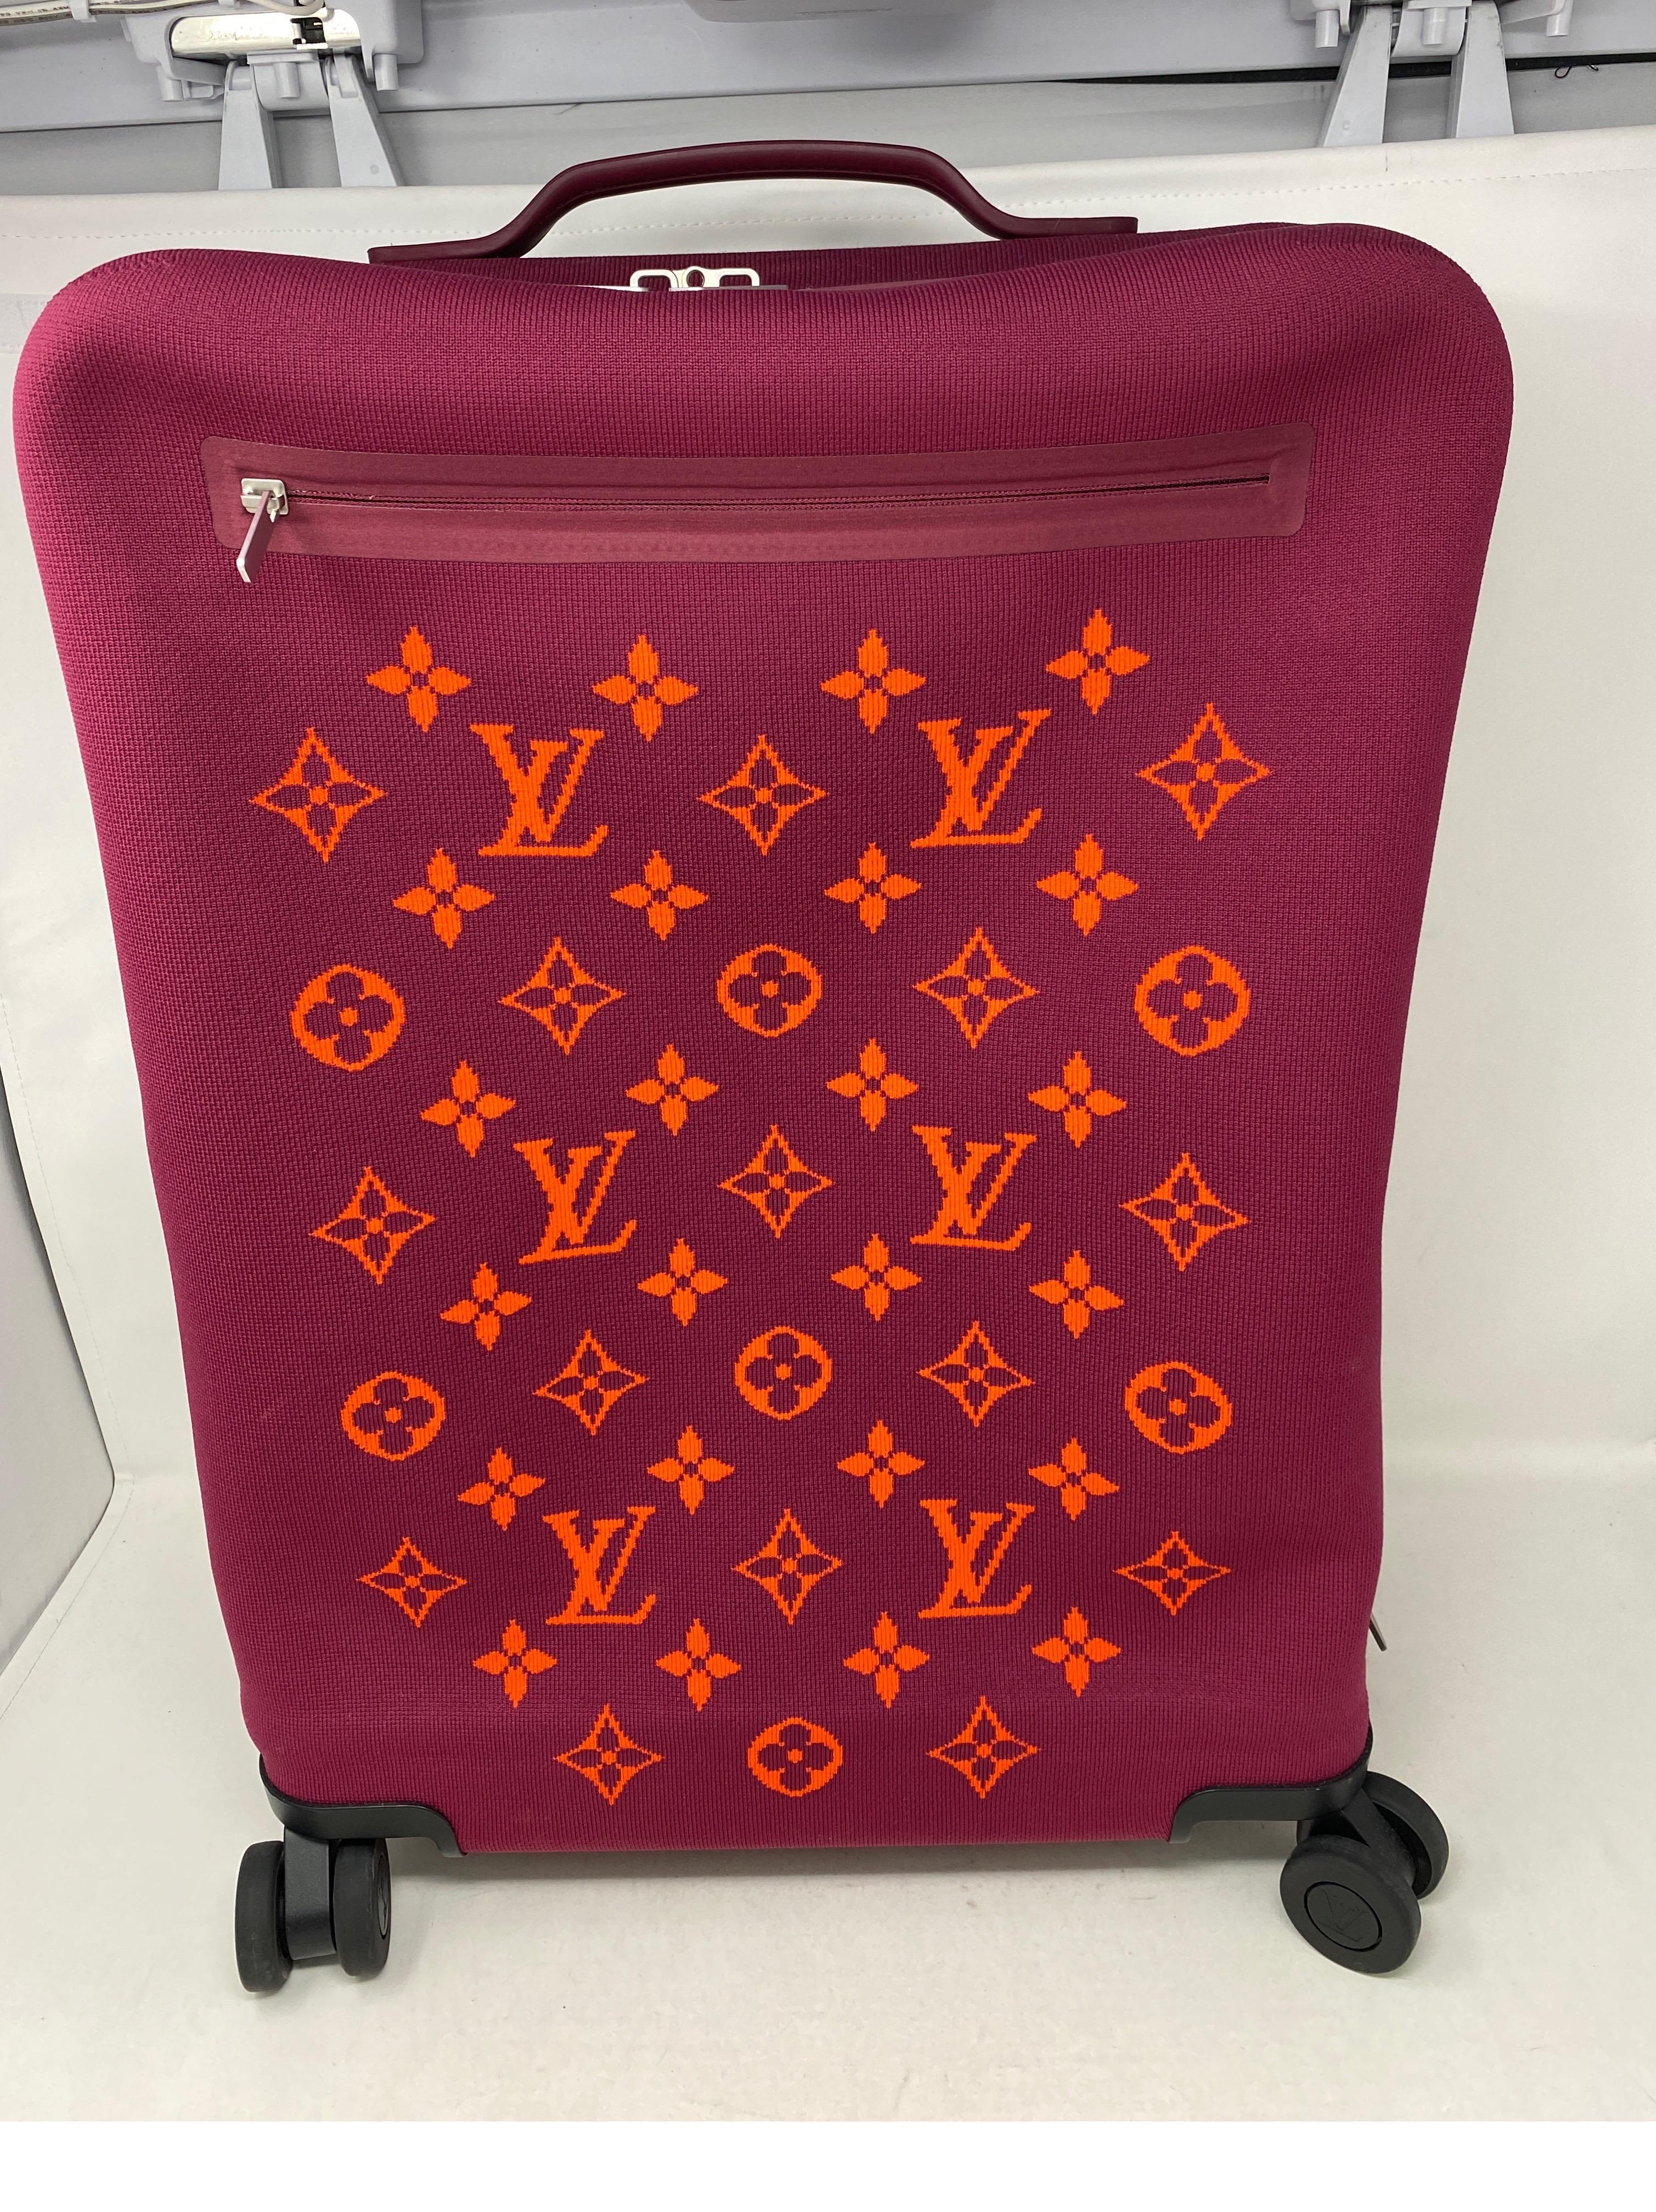 Men's Louis Vuitton Luggage and suitcases from A$699